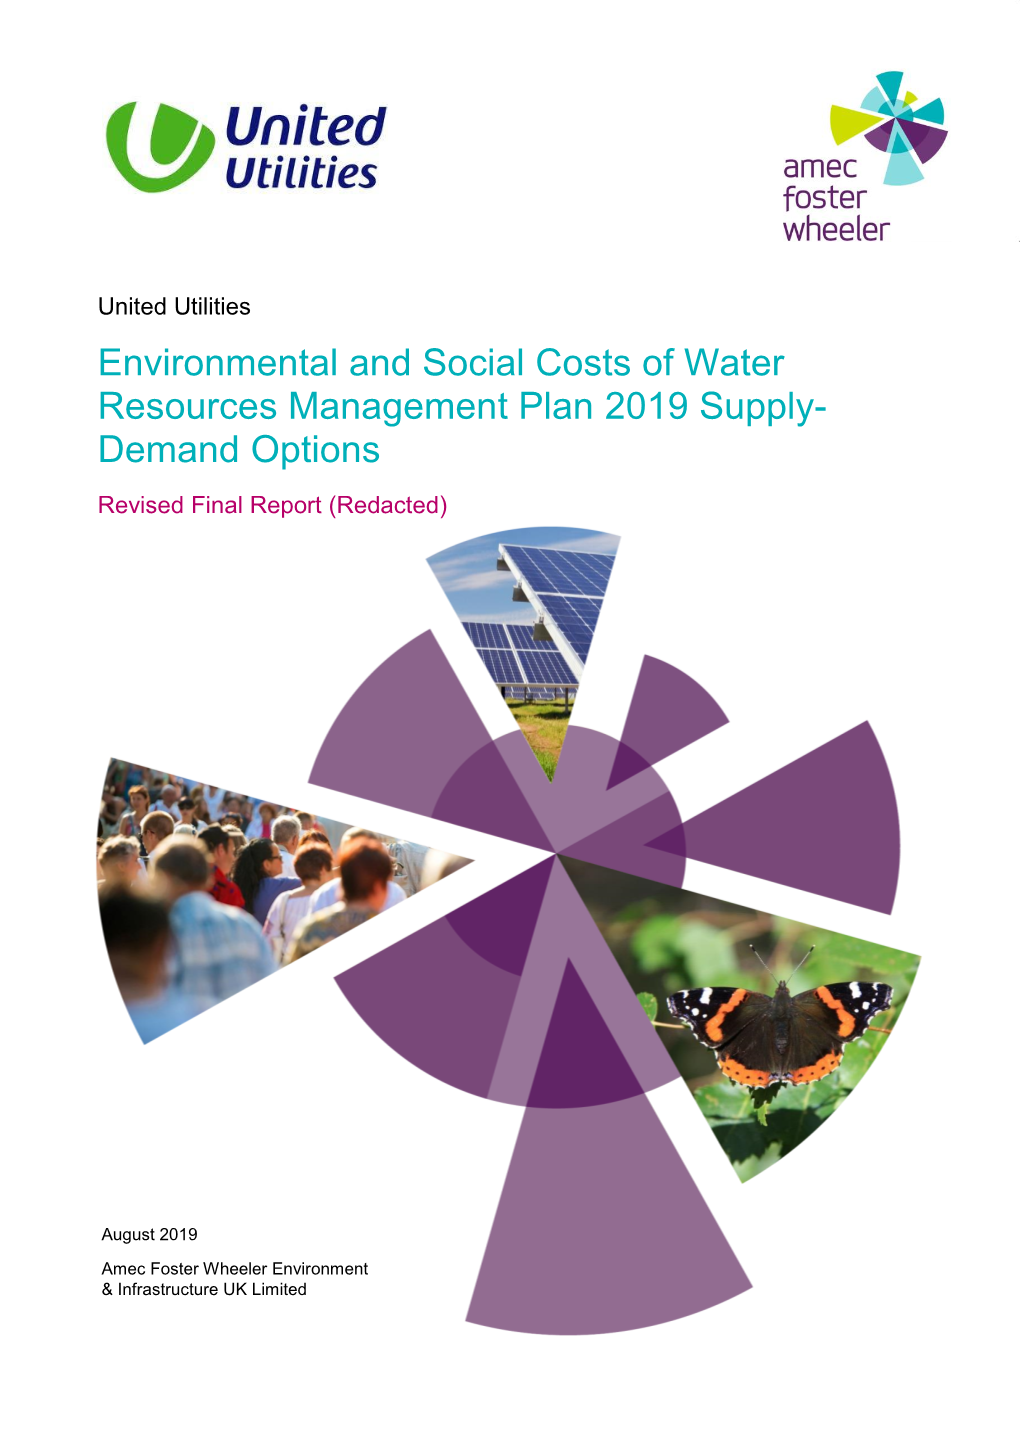 Environmental and Social Costs of Water Resources Management Plan 2019 Supply- Demand Options